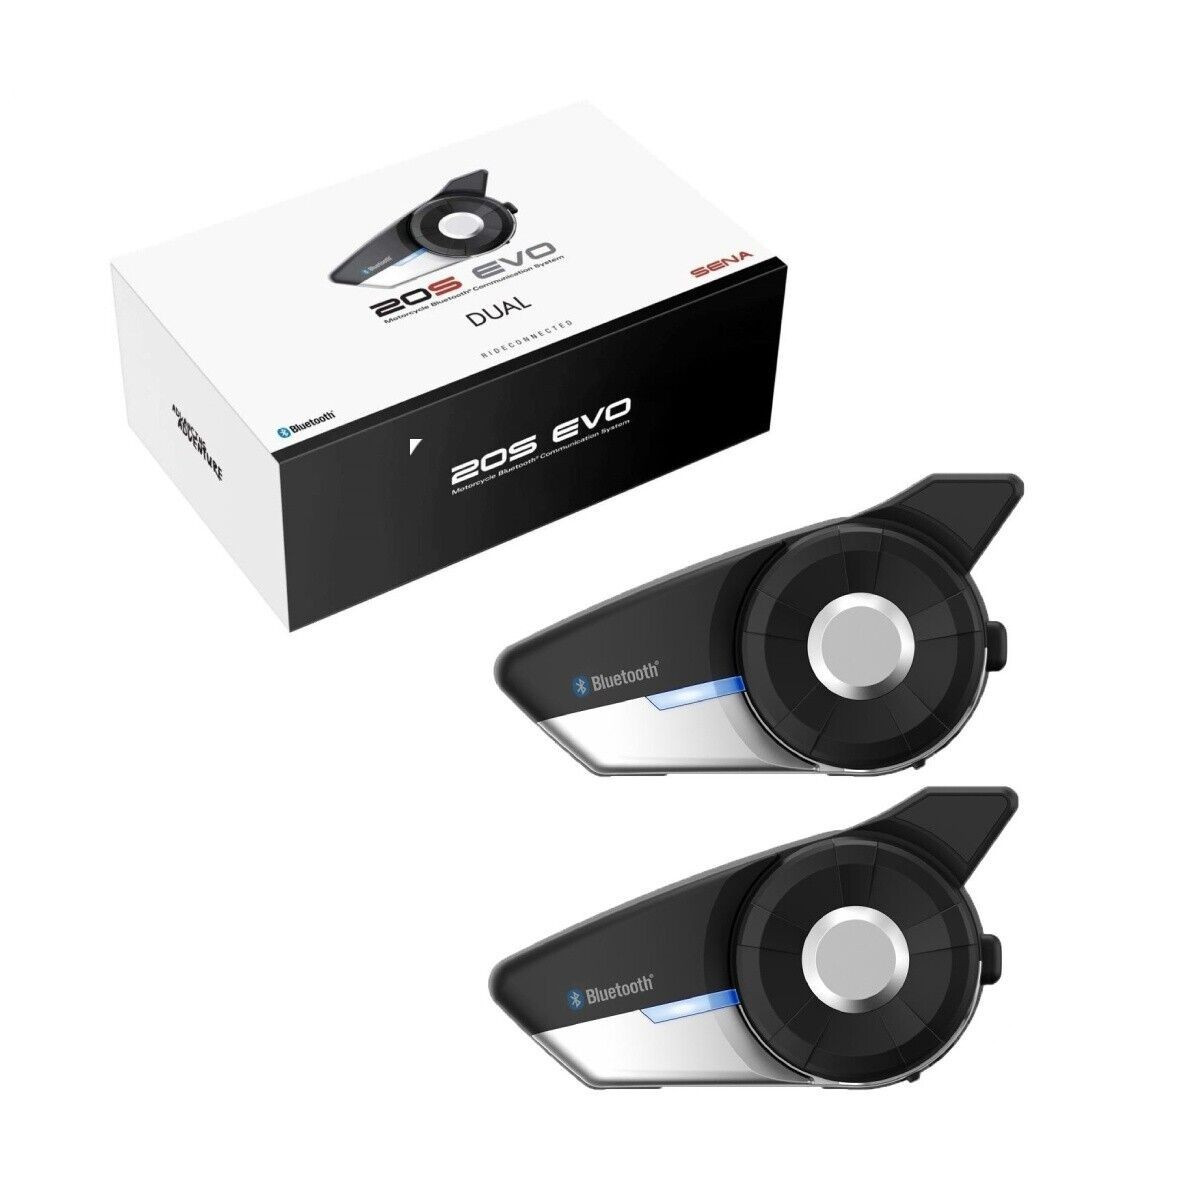 Sena Motorcycle Bluetooth Headset System Dual Pack Earbuds (p/n- 20S-EVO-01D)